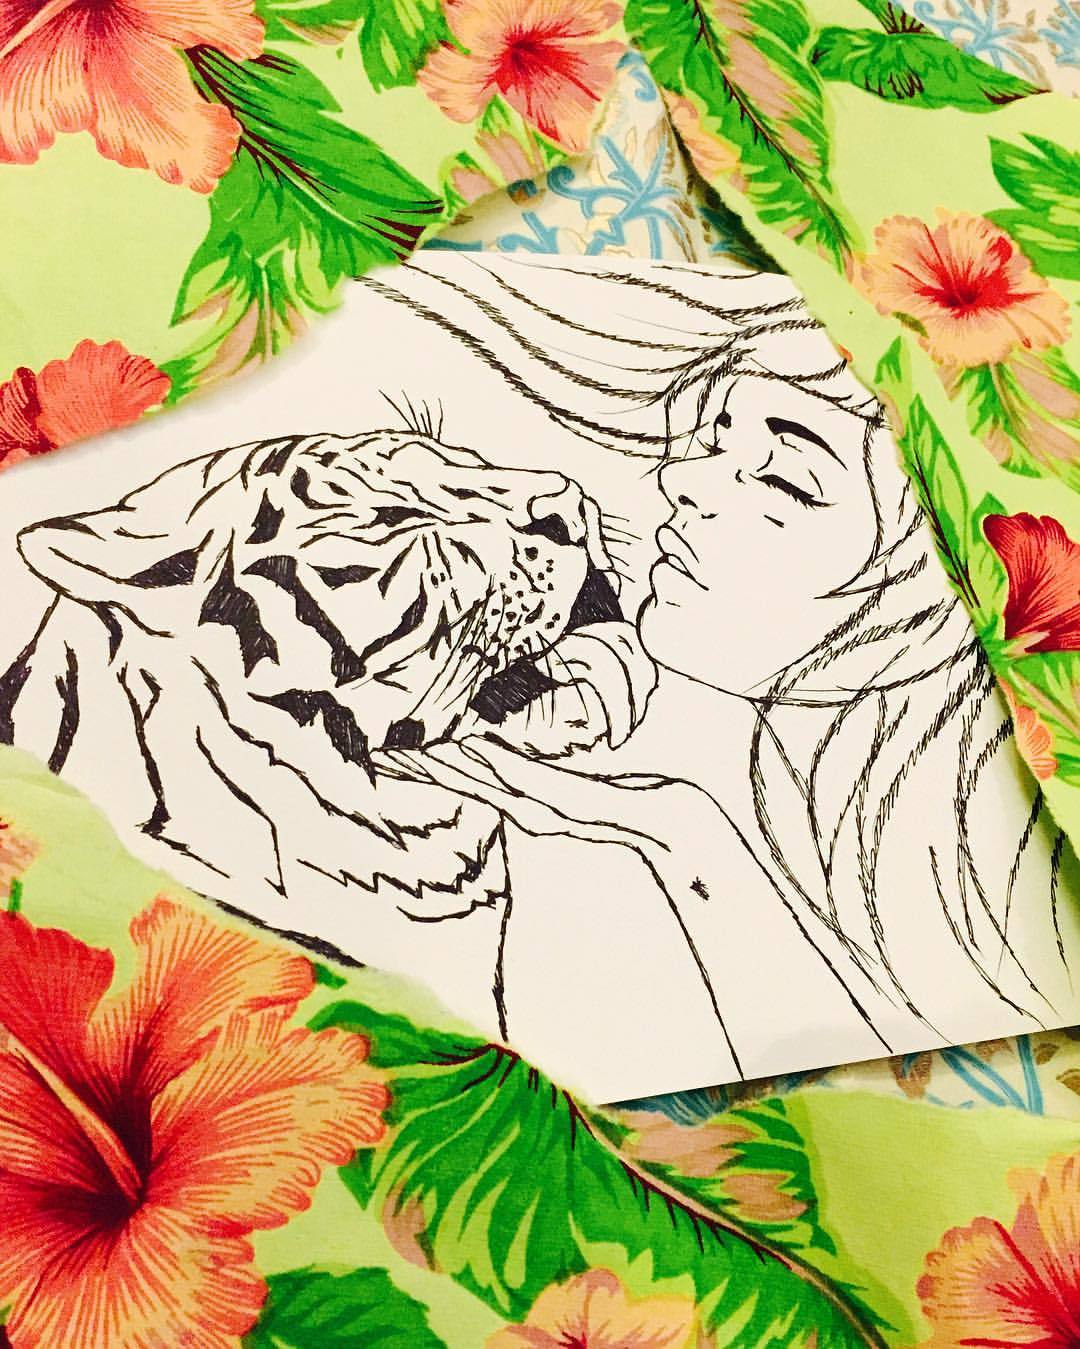 Companion concept sketch which is part of the previous tiger/woman combo. Working on a drawing for the third piece in the series. What do you think? Leave a comment below!! #PaperMonster #stencil #stencils #stencilart #stencilgraffiti #graffiti...